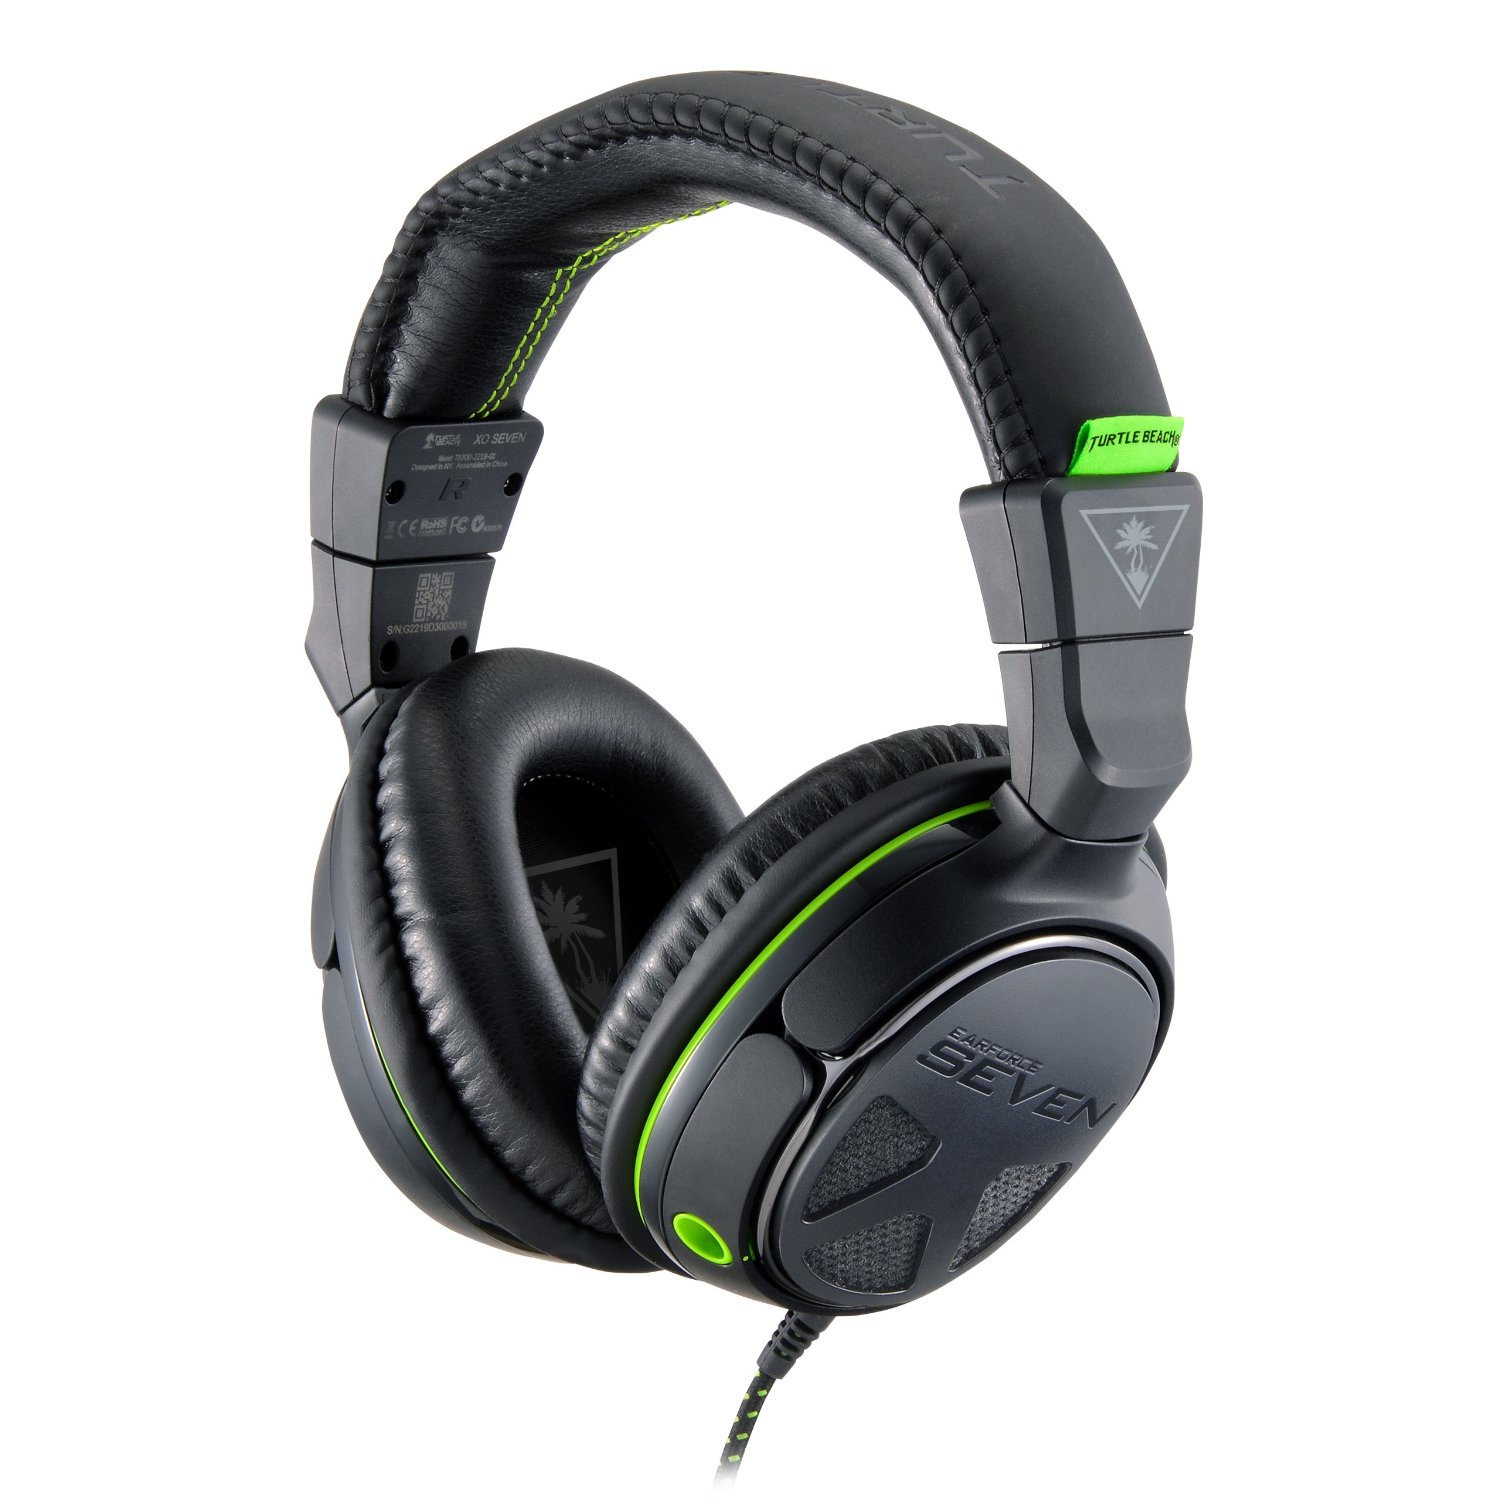 Turtle Beach Ear Force XO Seven Premium Xbox One Gaming Headset Review  2